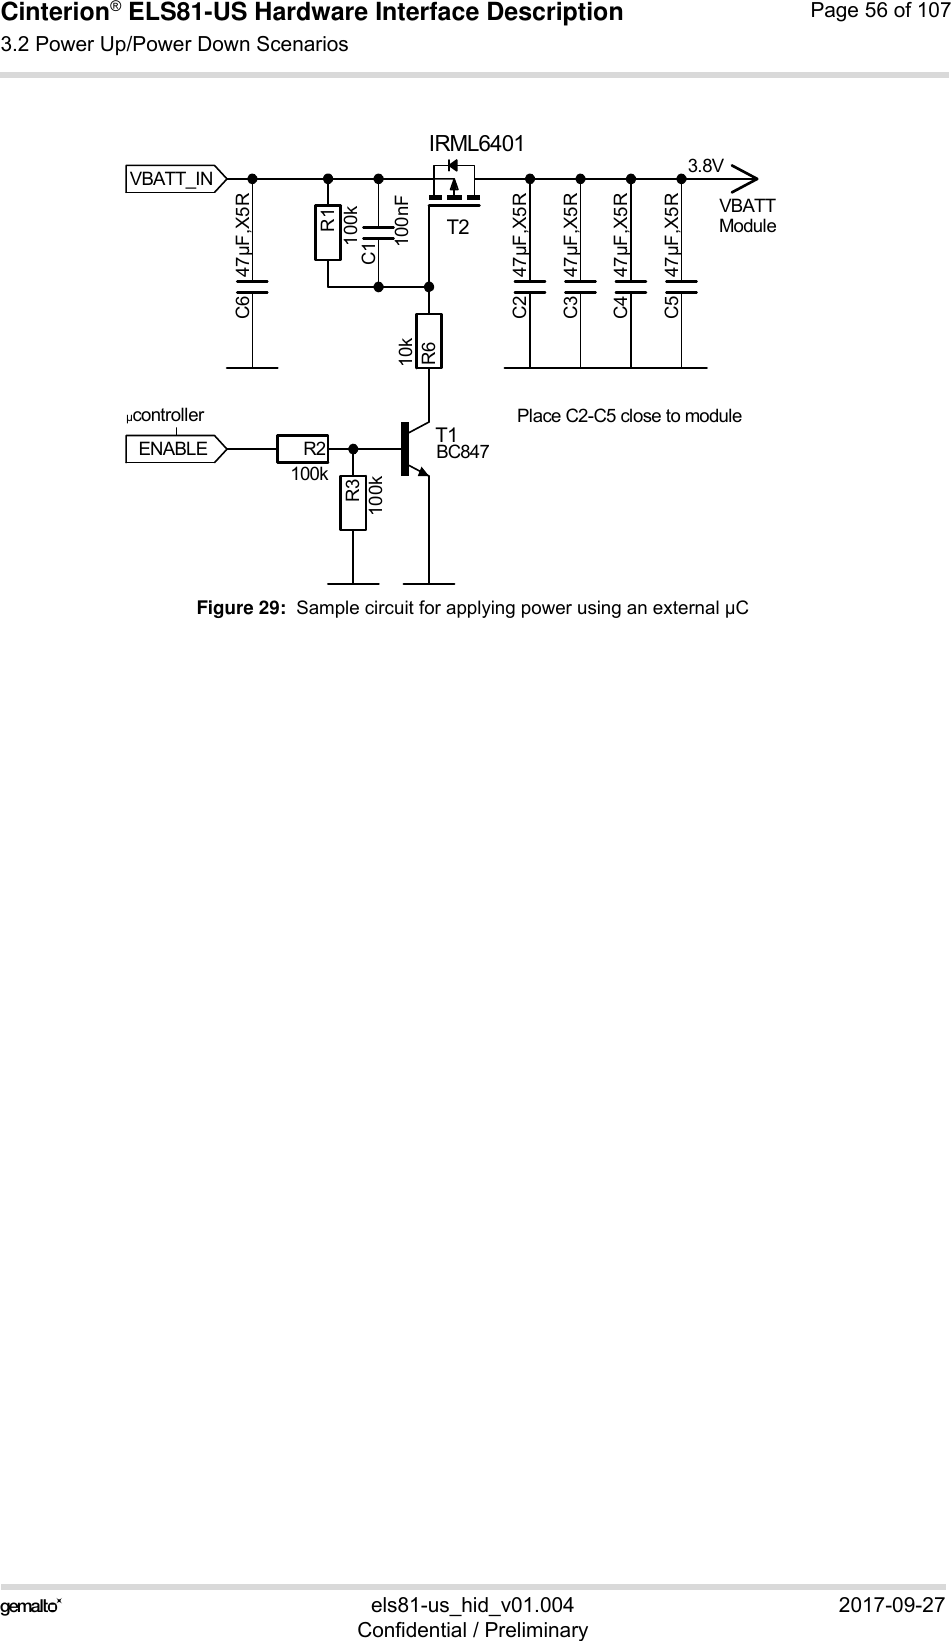 Cinterion® ELS81-US Hardware Interface Description3.2 Power Up/Power Down Scenarios77els81-us_hid_v01.004 2017-09-27Confidential / PreliminaryPage 56 of 107Figure 29:  Sample circuit for applying power using an external µC3.8VModulePlace C2-C5 close to moduleµcontrollerENABLEVBATTVBATT_INC1100nFC2 47µF,X5RC3 47µF,X5RC4 47µF,X5RC5 47µF,X5RC6 47µF,X5RR1100kR2100kR3100kR610kT1T2IRML6401BC847